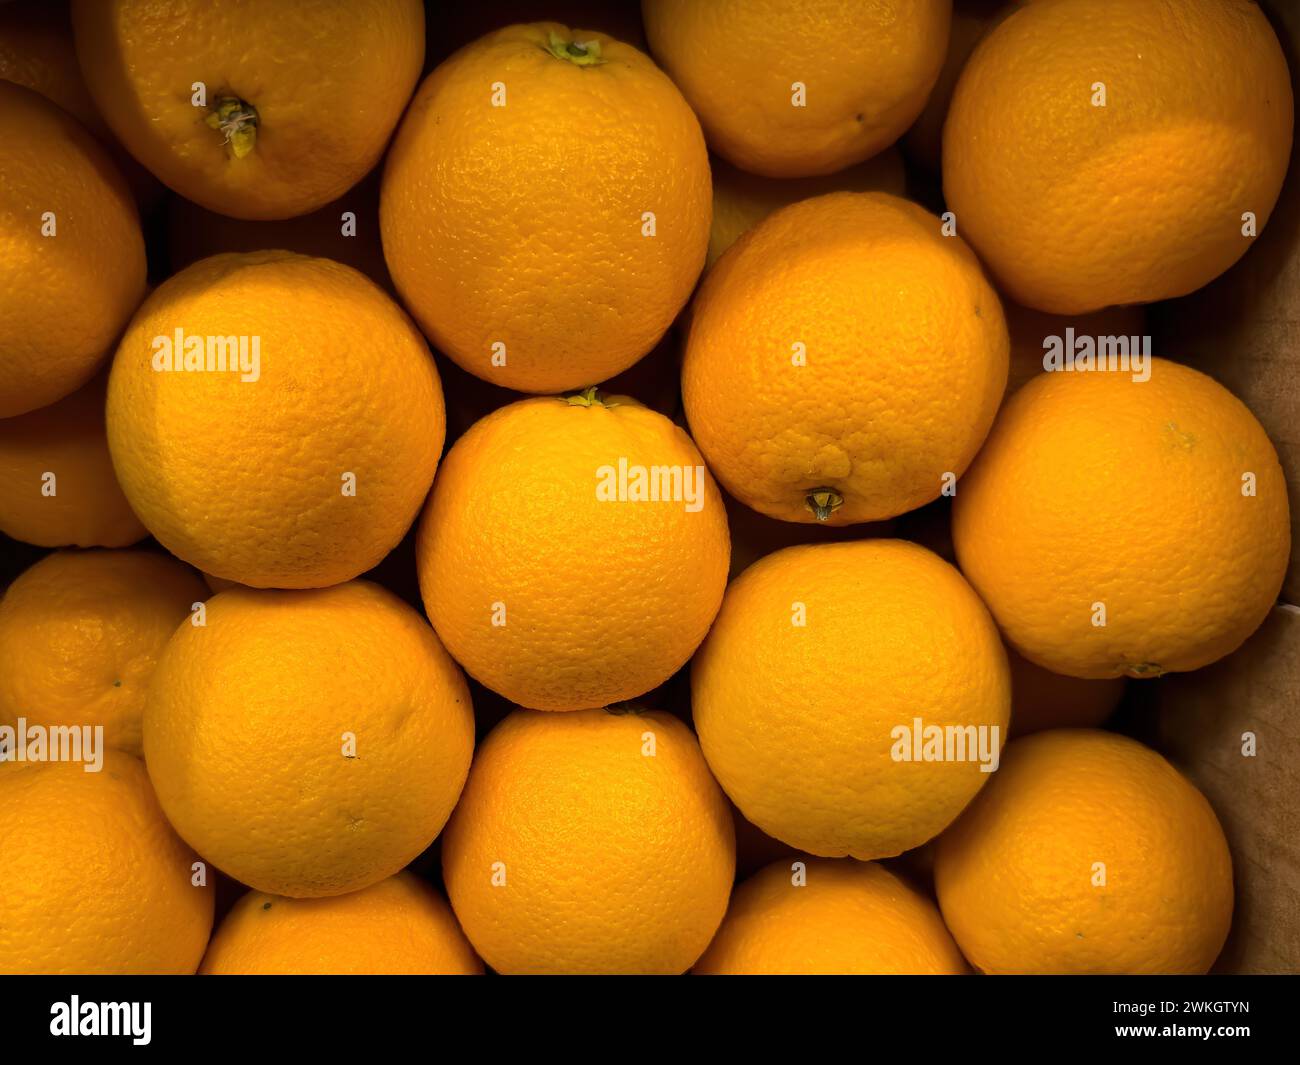 Oranges with high vitamin C content in display of grocery shop food retailer supermarket, Germany Stock Photo